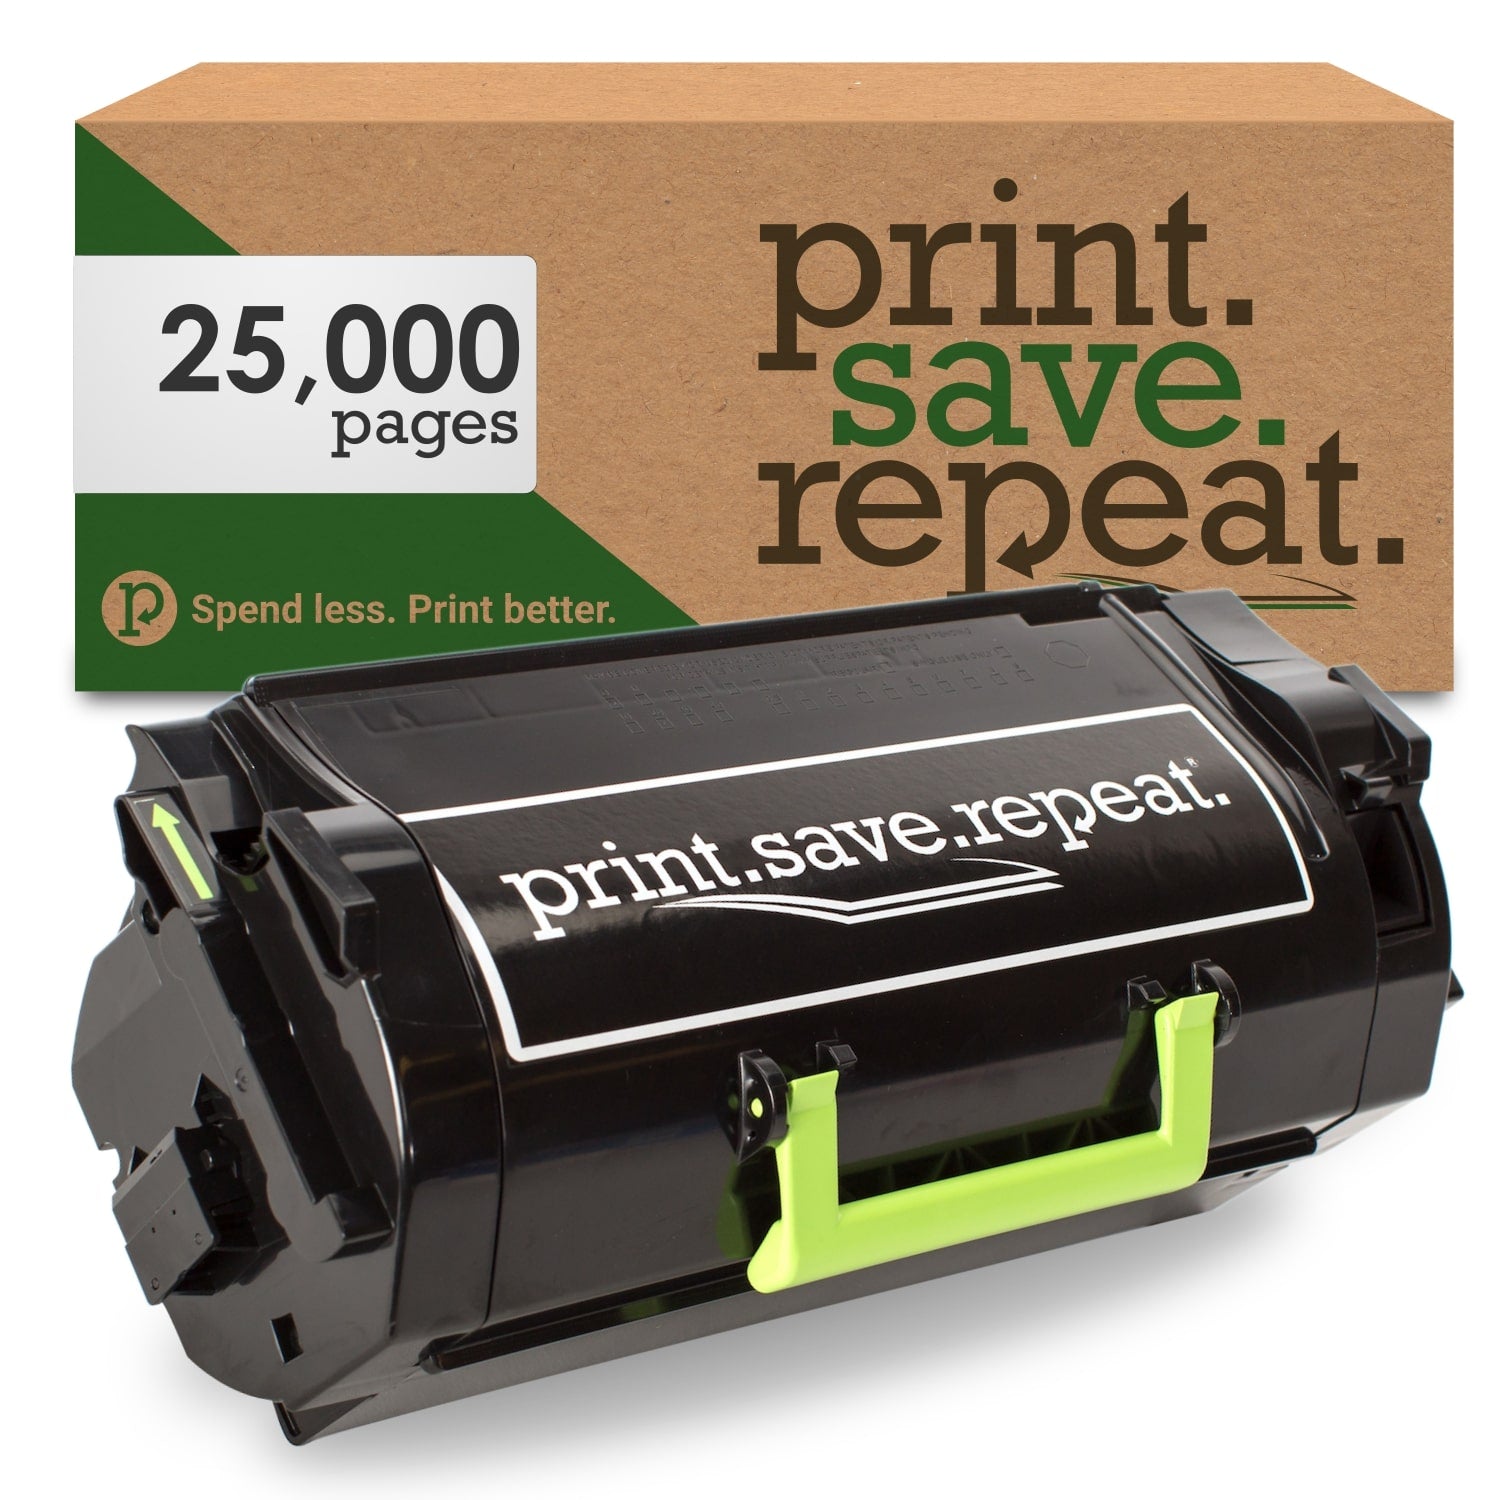 Print.Save.Repeat. Lexmark 621HE High Yield Remanufactured Toner Cartridge (62D1H0E) for MX710, MX711, MX810, MX811, MX812 [25,000 Pages]